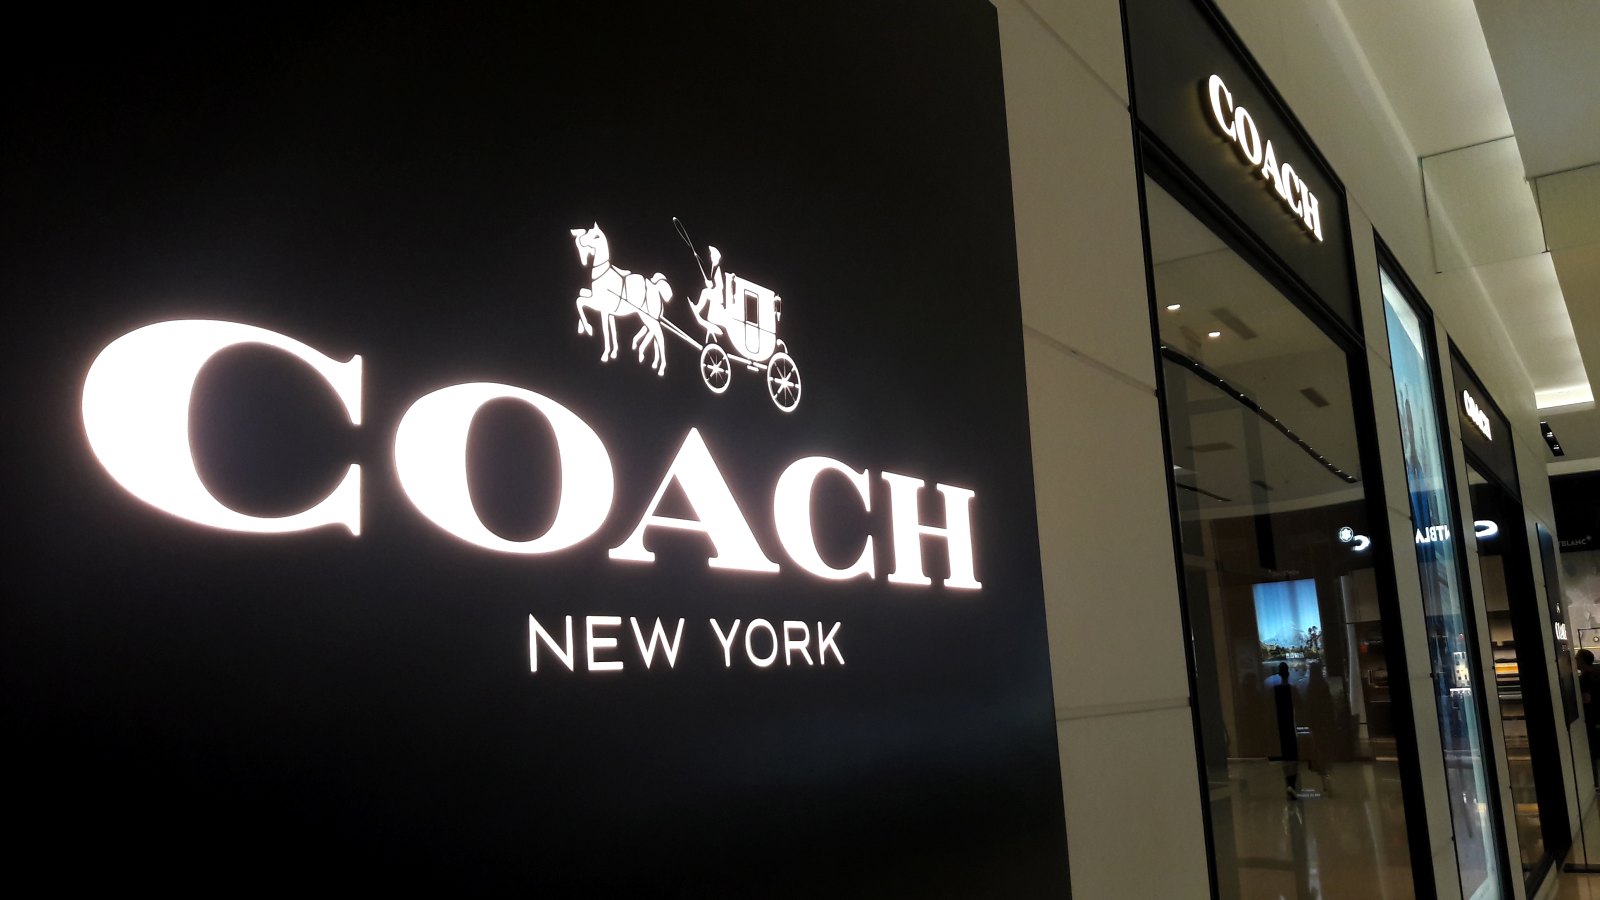 Coach storefront